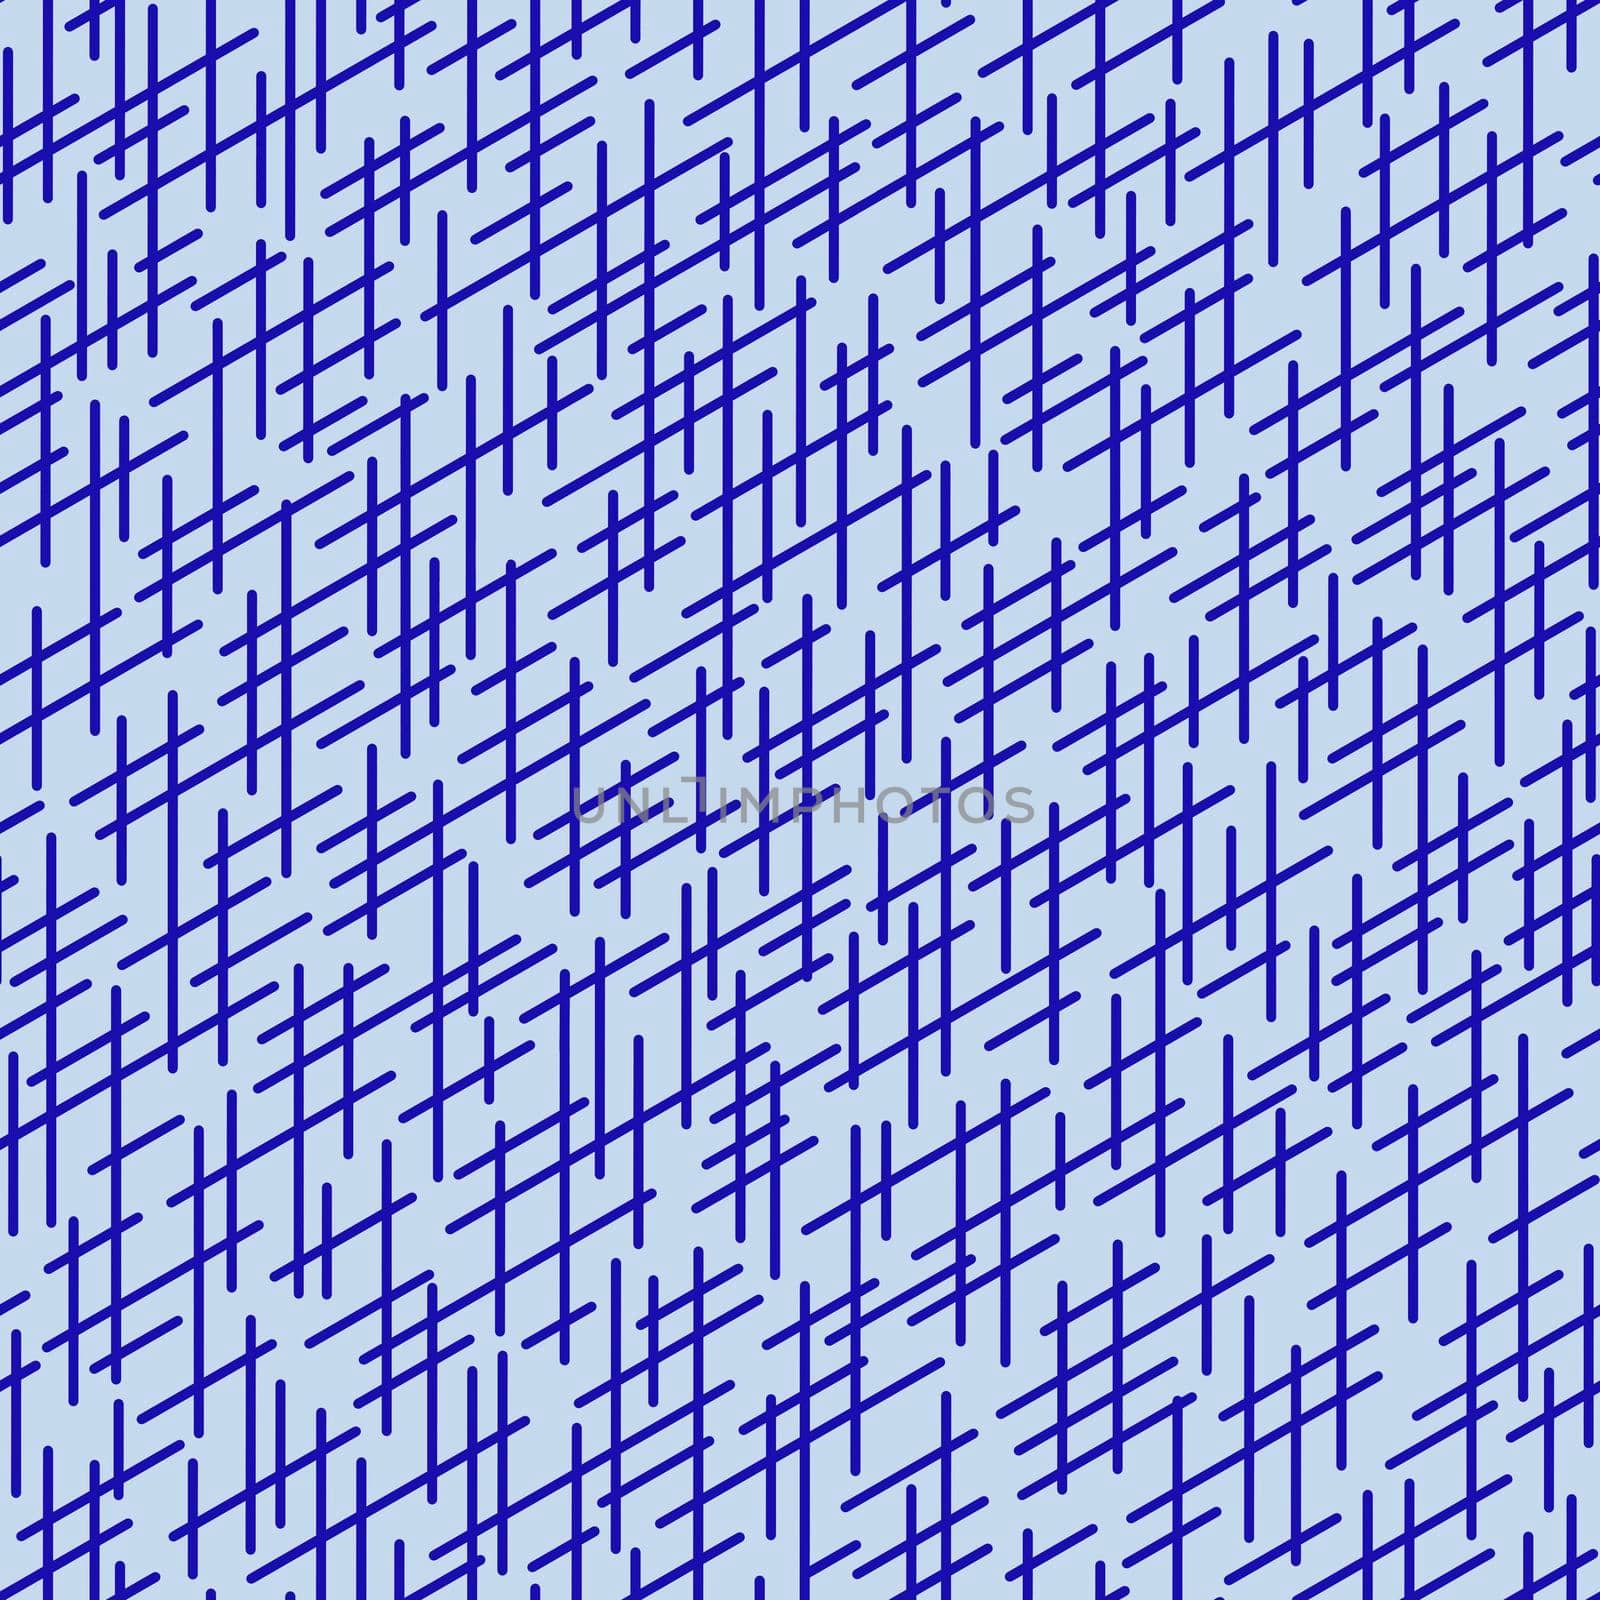 Randomly crossing lines making pattern.Chaotic short lines seamless pattern,chips and sticks modern repeatable motif.Good for print, textile,fabric, background, wrapping paper.Azure blue colors.